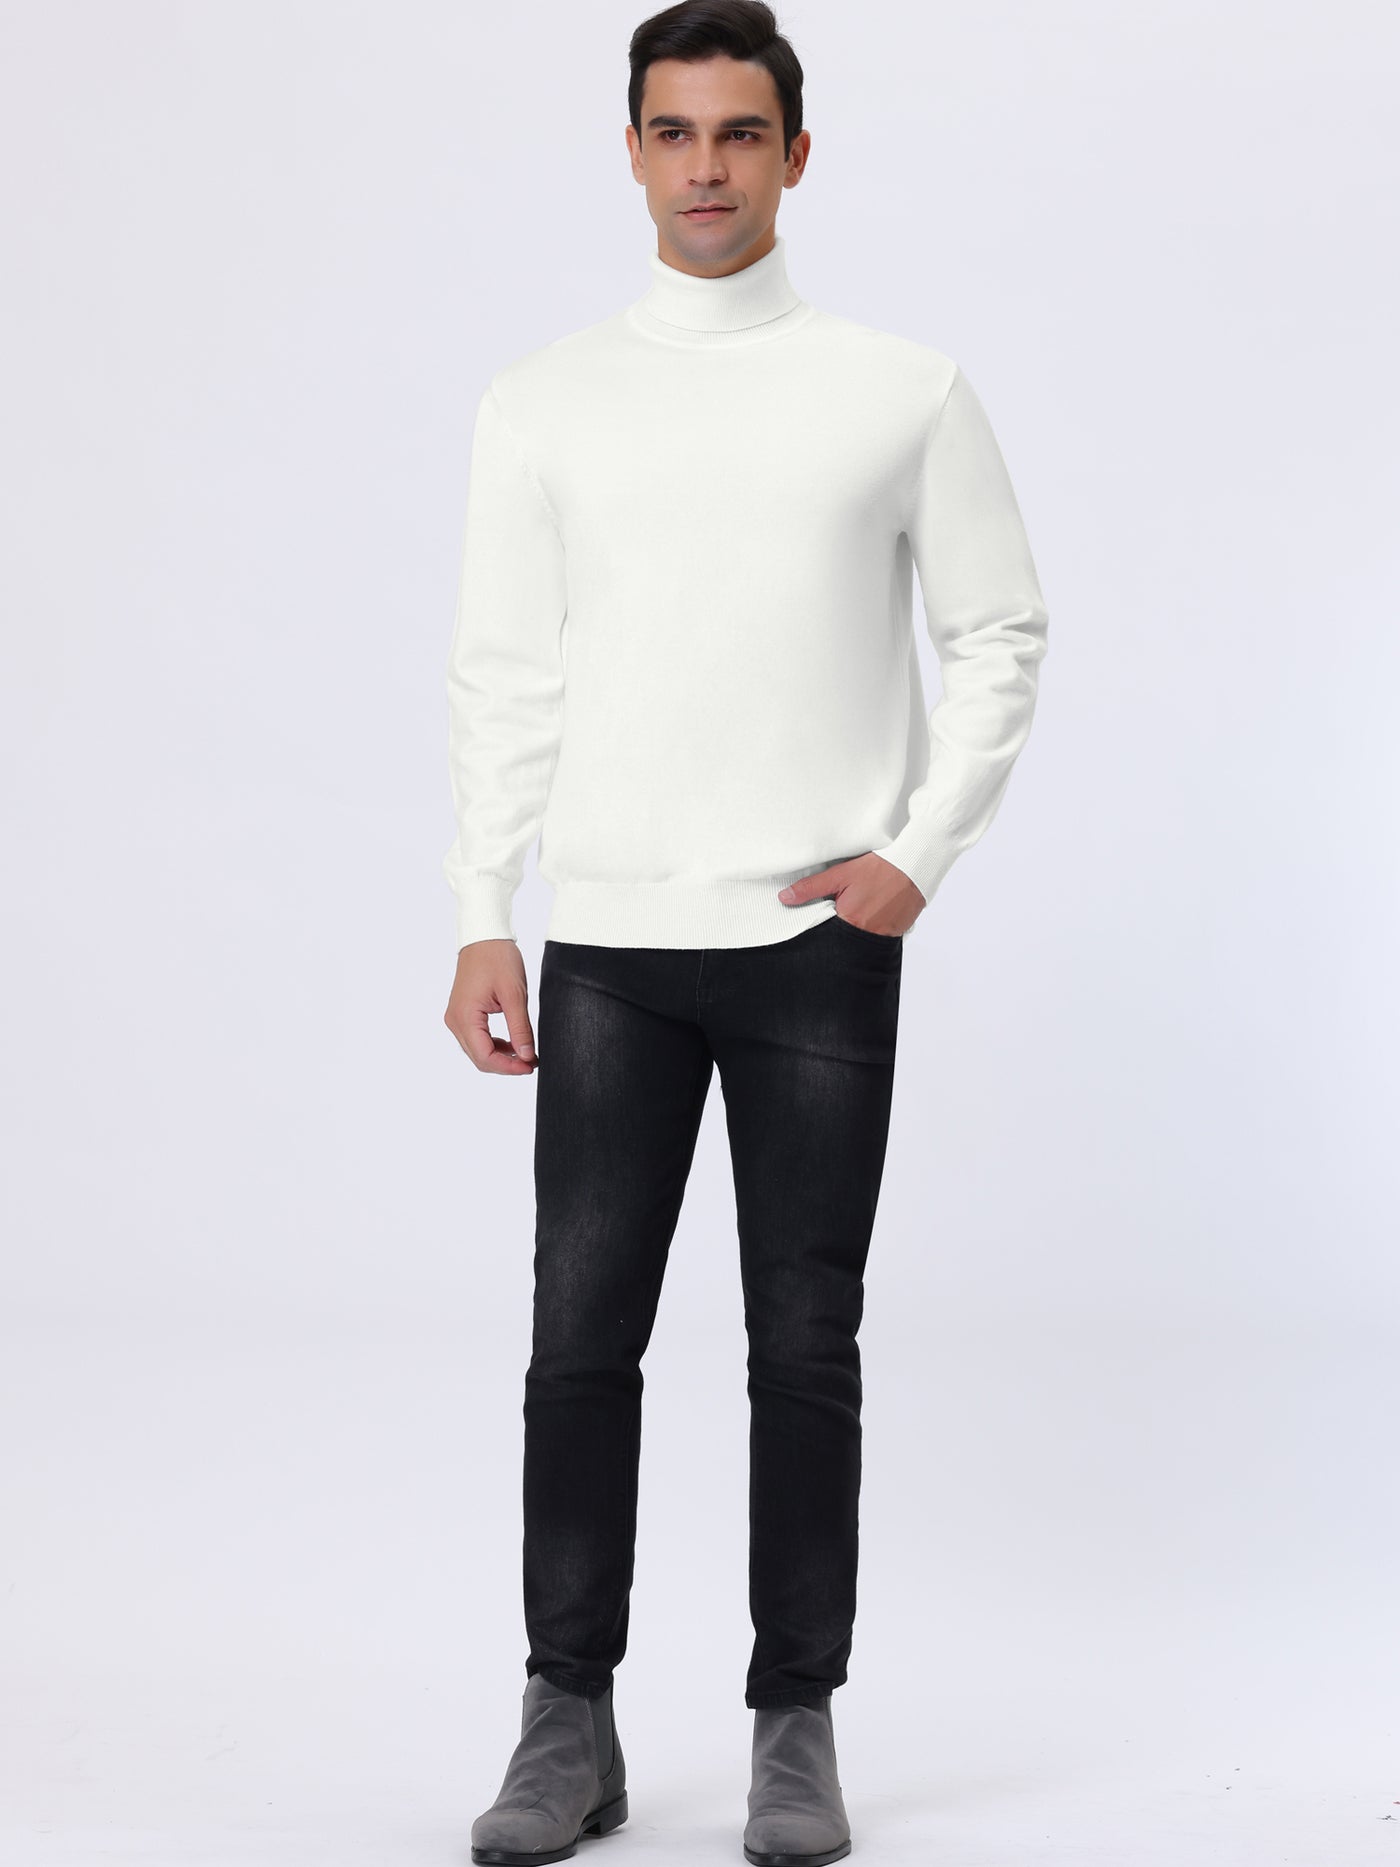 Bublédon Men's Turtleneck Sweater Long Sleeves Solid Color Casual Knitted Jumpers